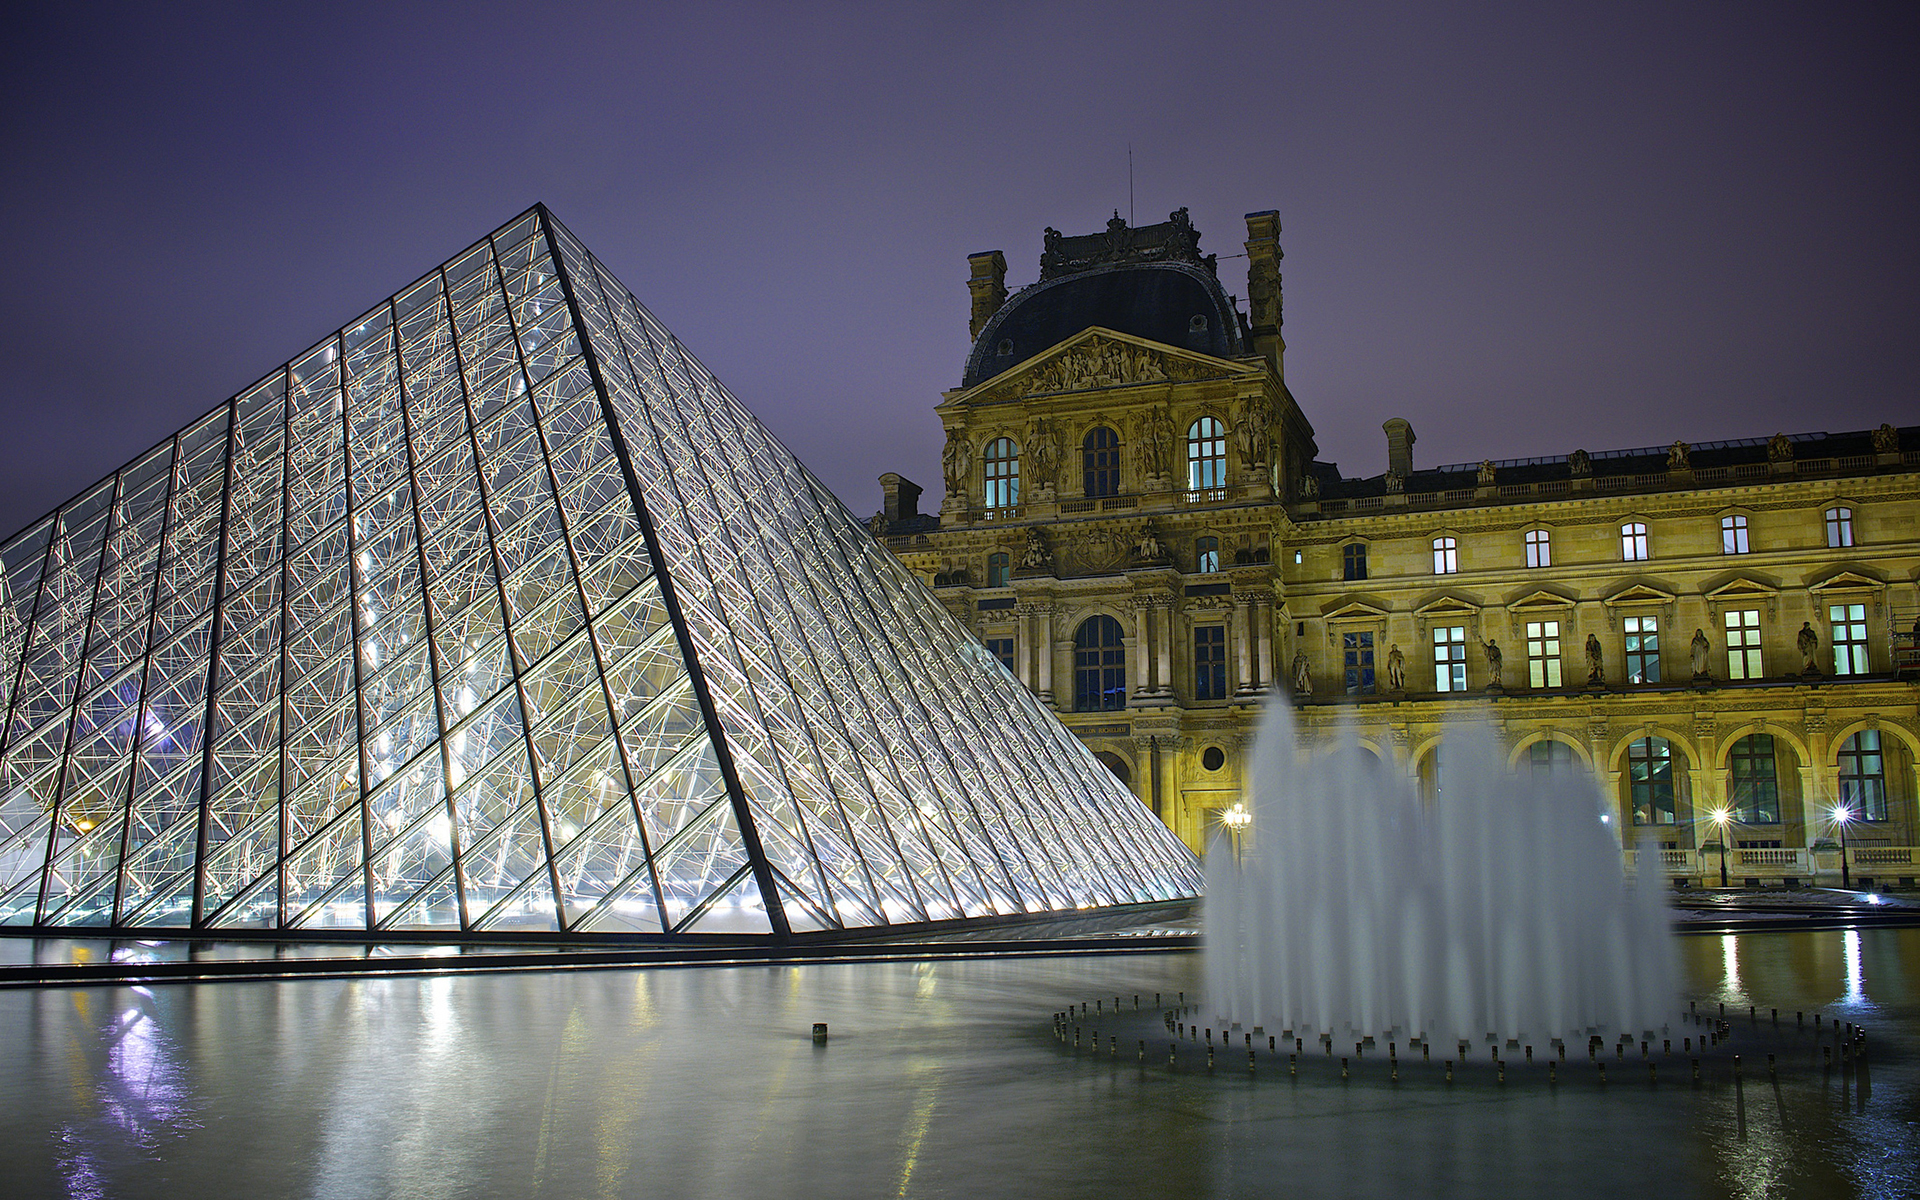 the, Louvre, Louvremore, Tagsmore, Tagsparis, Pyramid, Buildings, Fountain Wallpaper